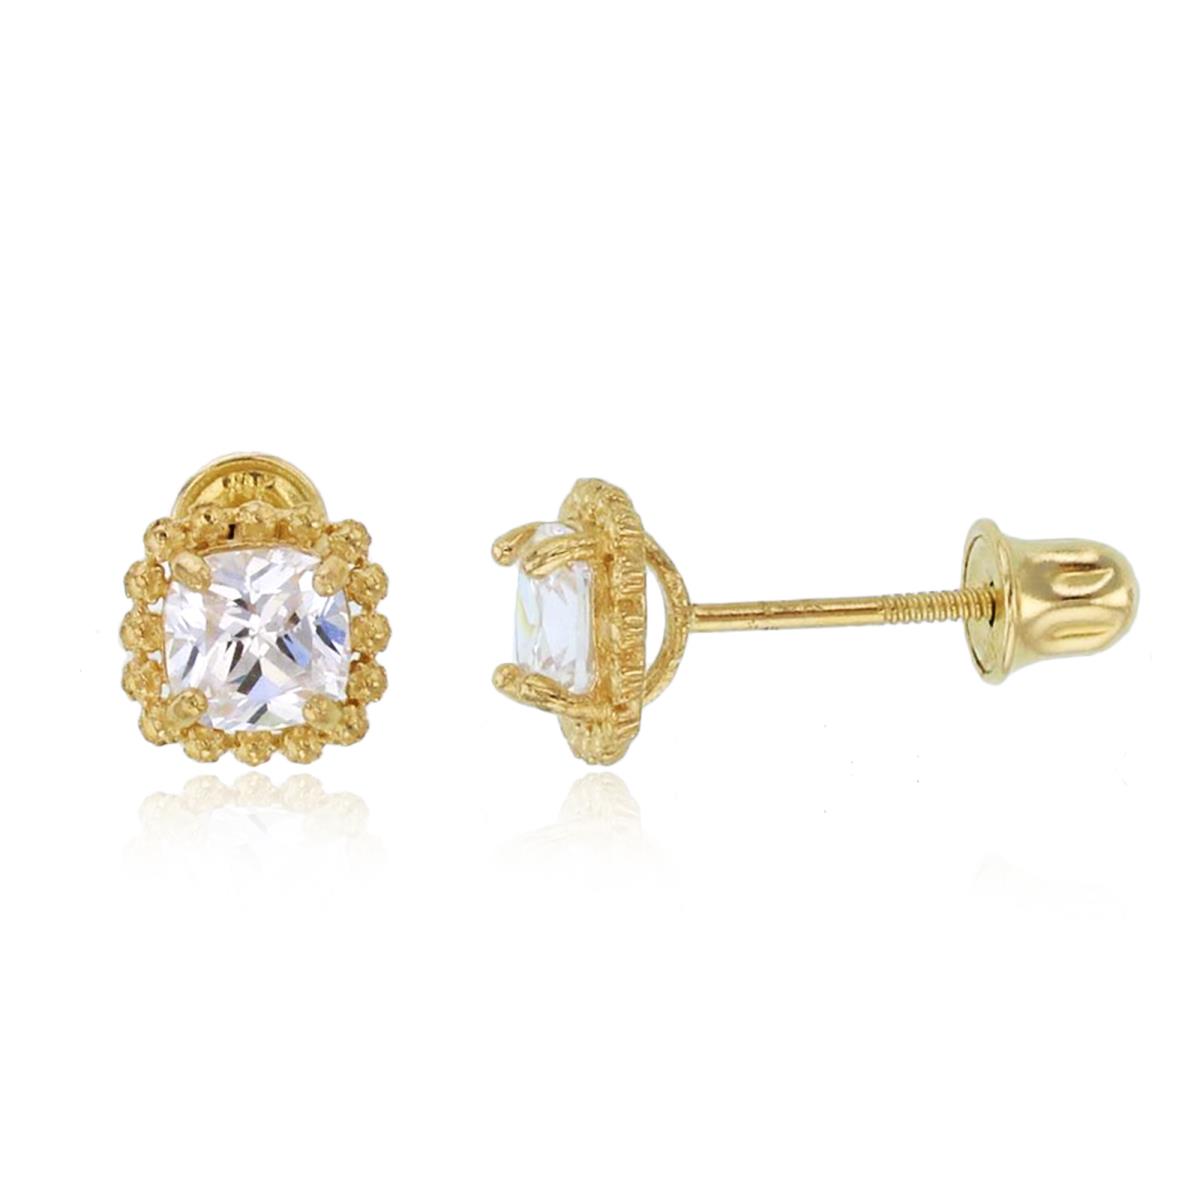 14K Yellow Gold 4mm Cushion CZ Textured Studs with Screw Backs